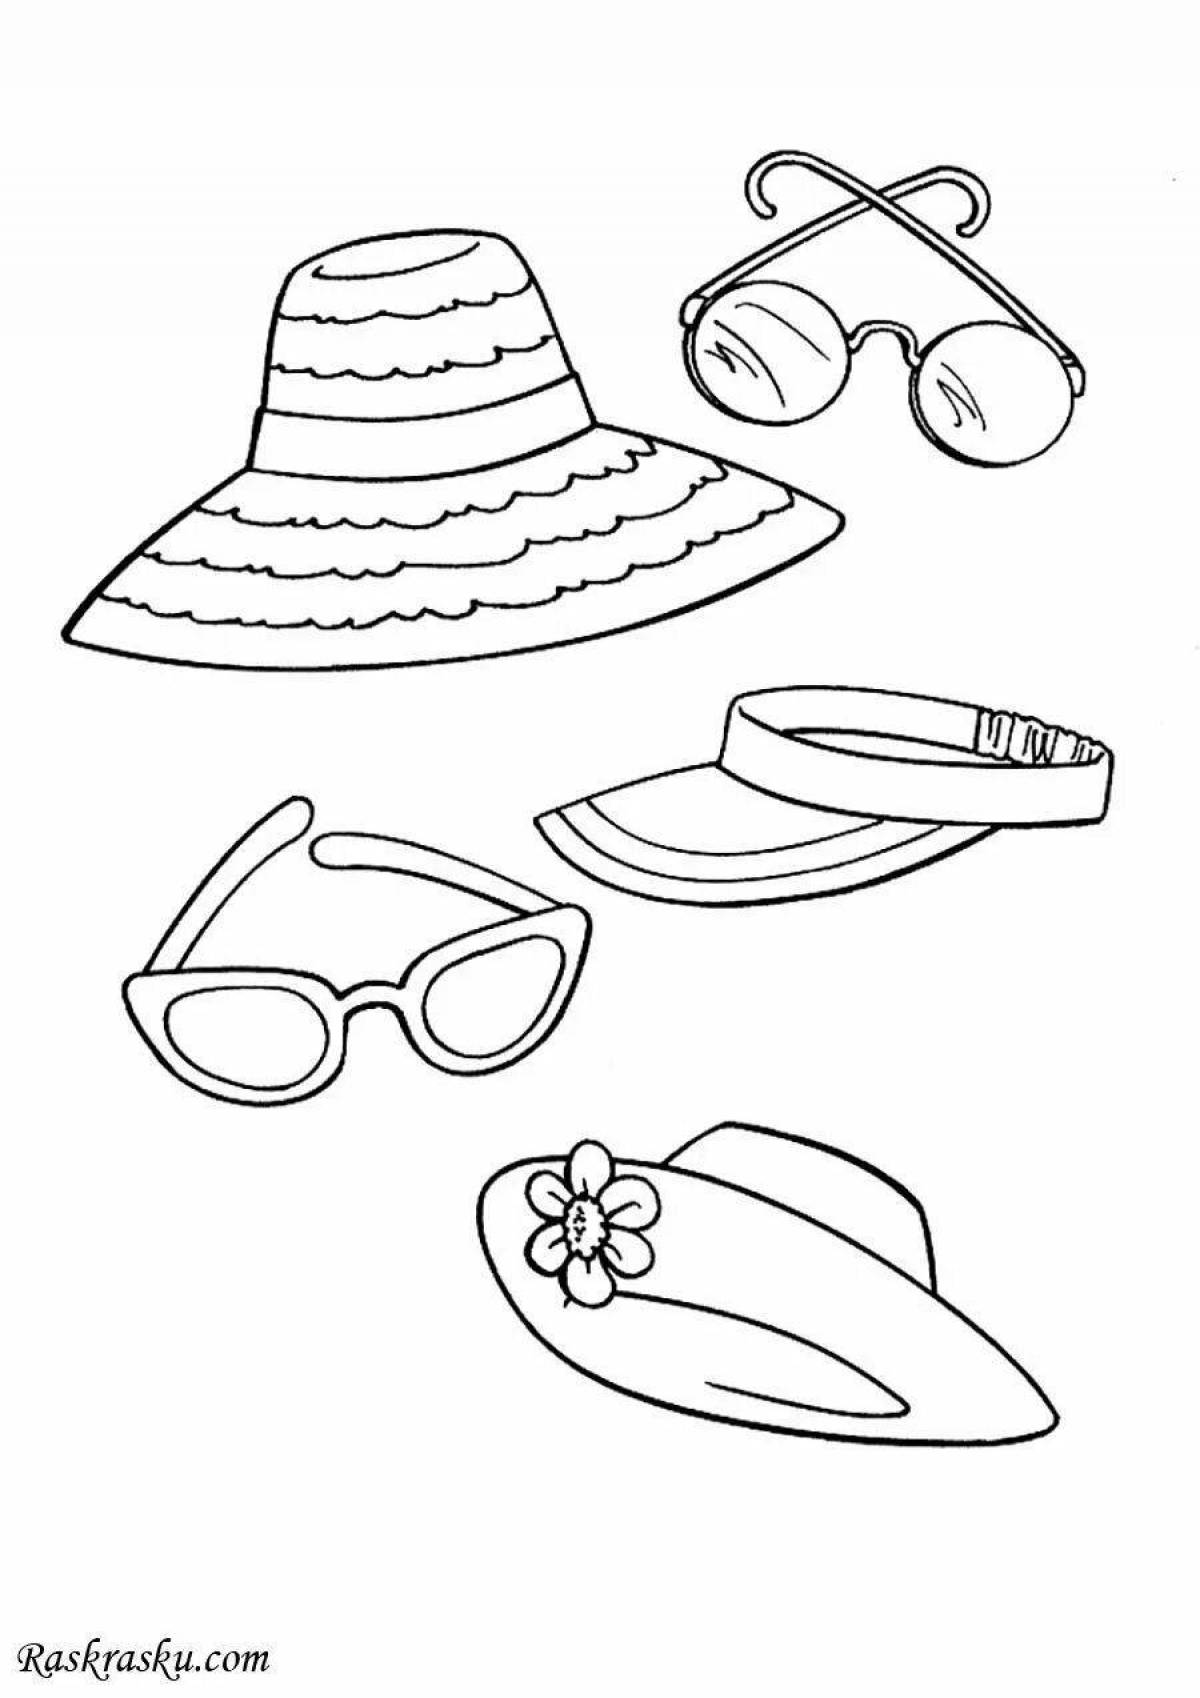 Adorable summer clothes coloring page for kids